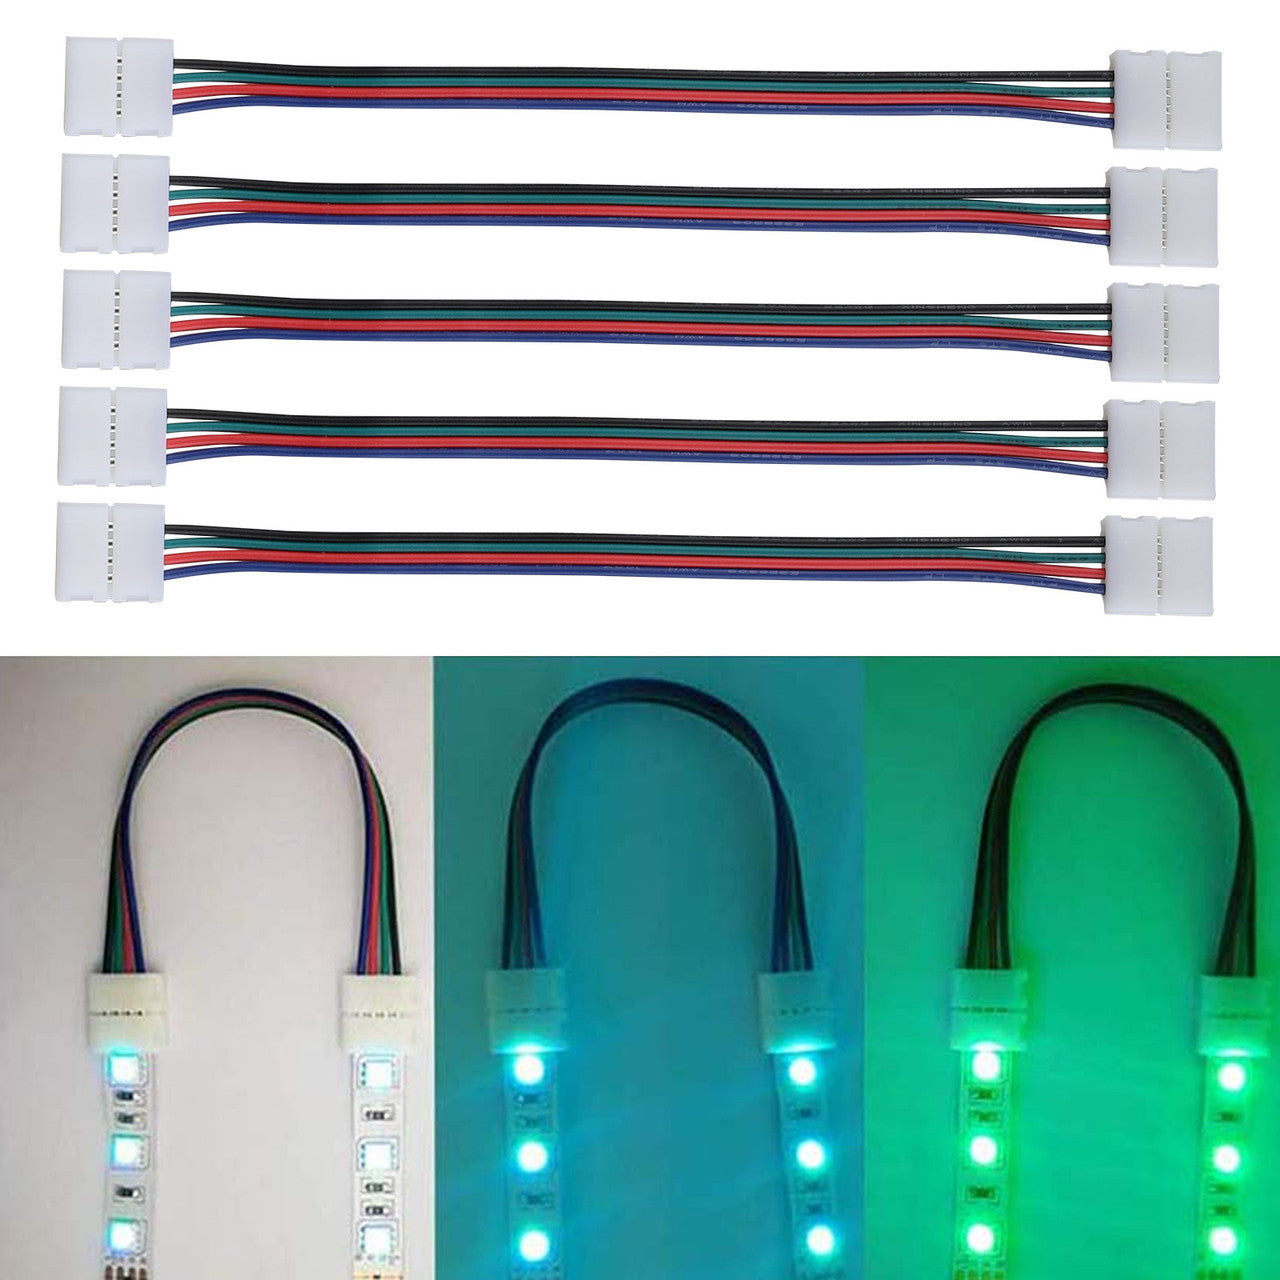 5050 4 Pin LED Strip Connector Kit - 8 Types of Solderless LED Strip Accessories Include LED Strip Light Connector Pigtails, Jumper Connectors, L Shape Connectors, Gapless Connectors, LED Strip Clips